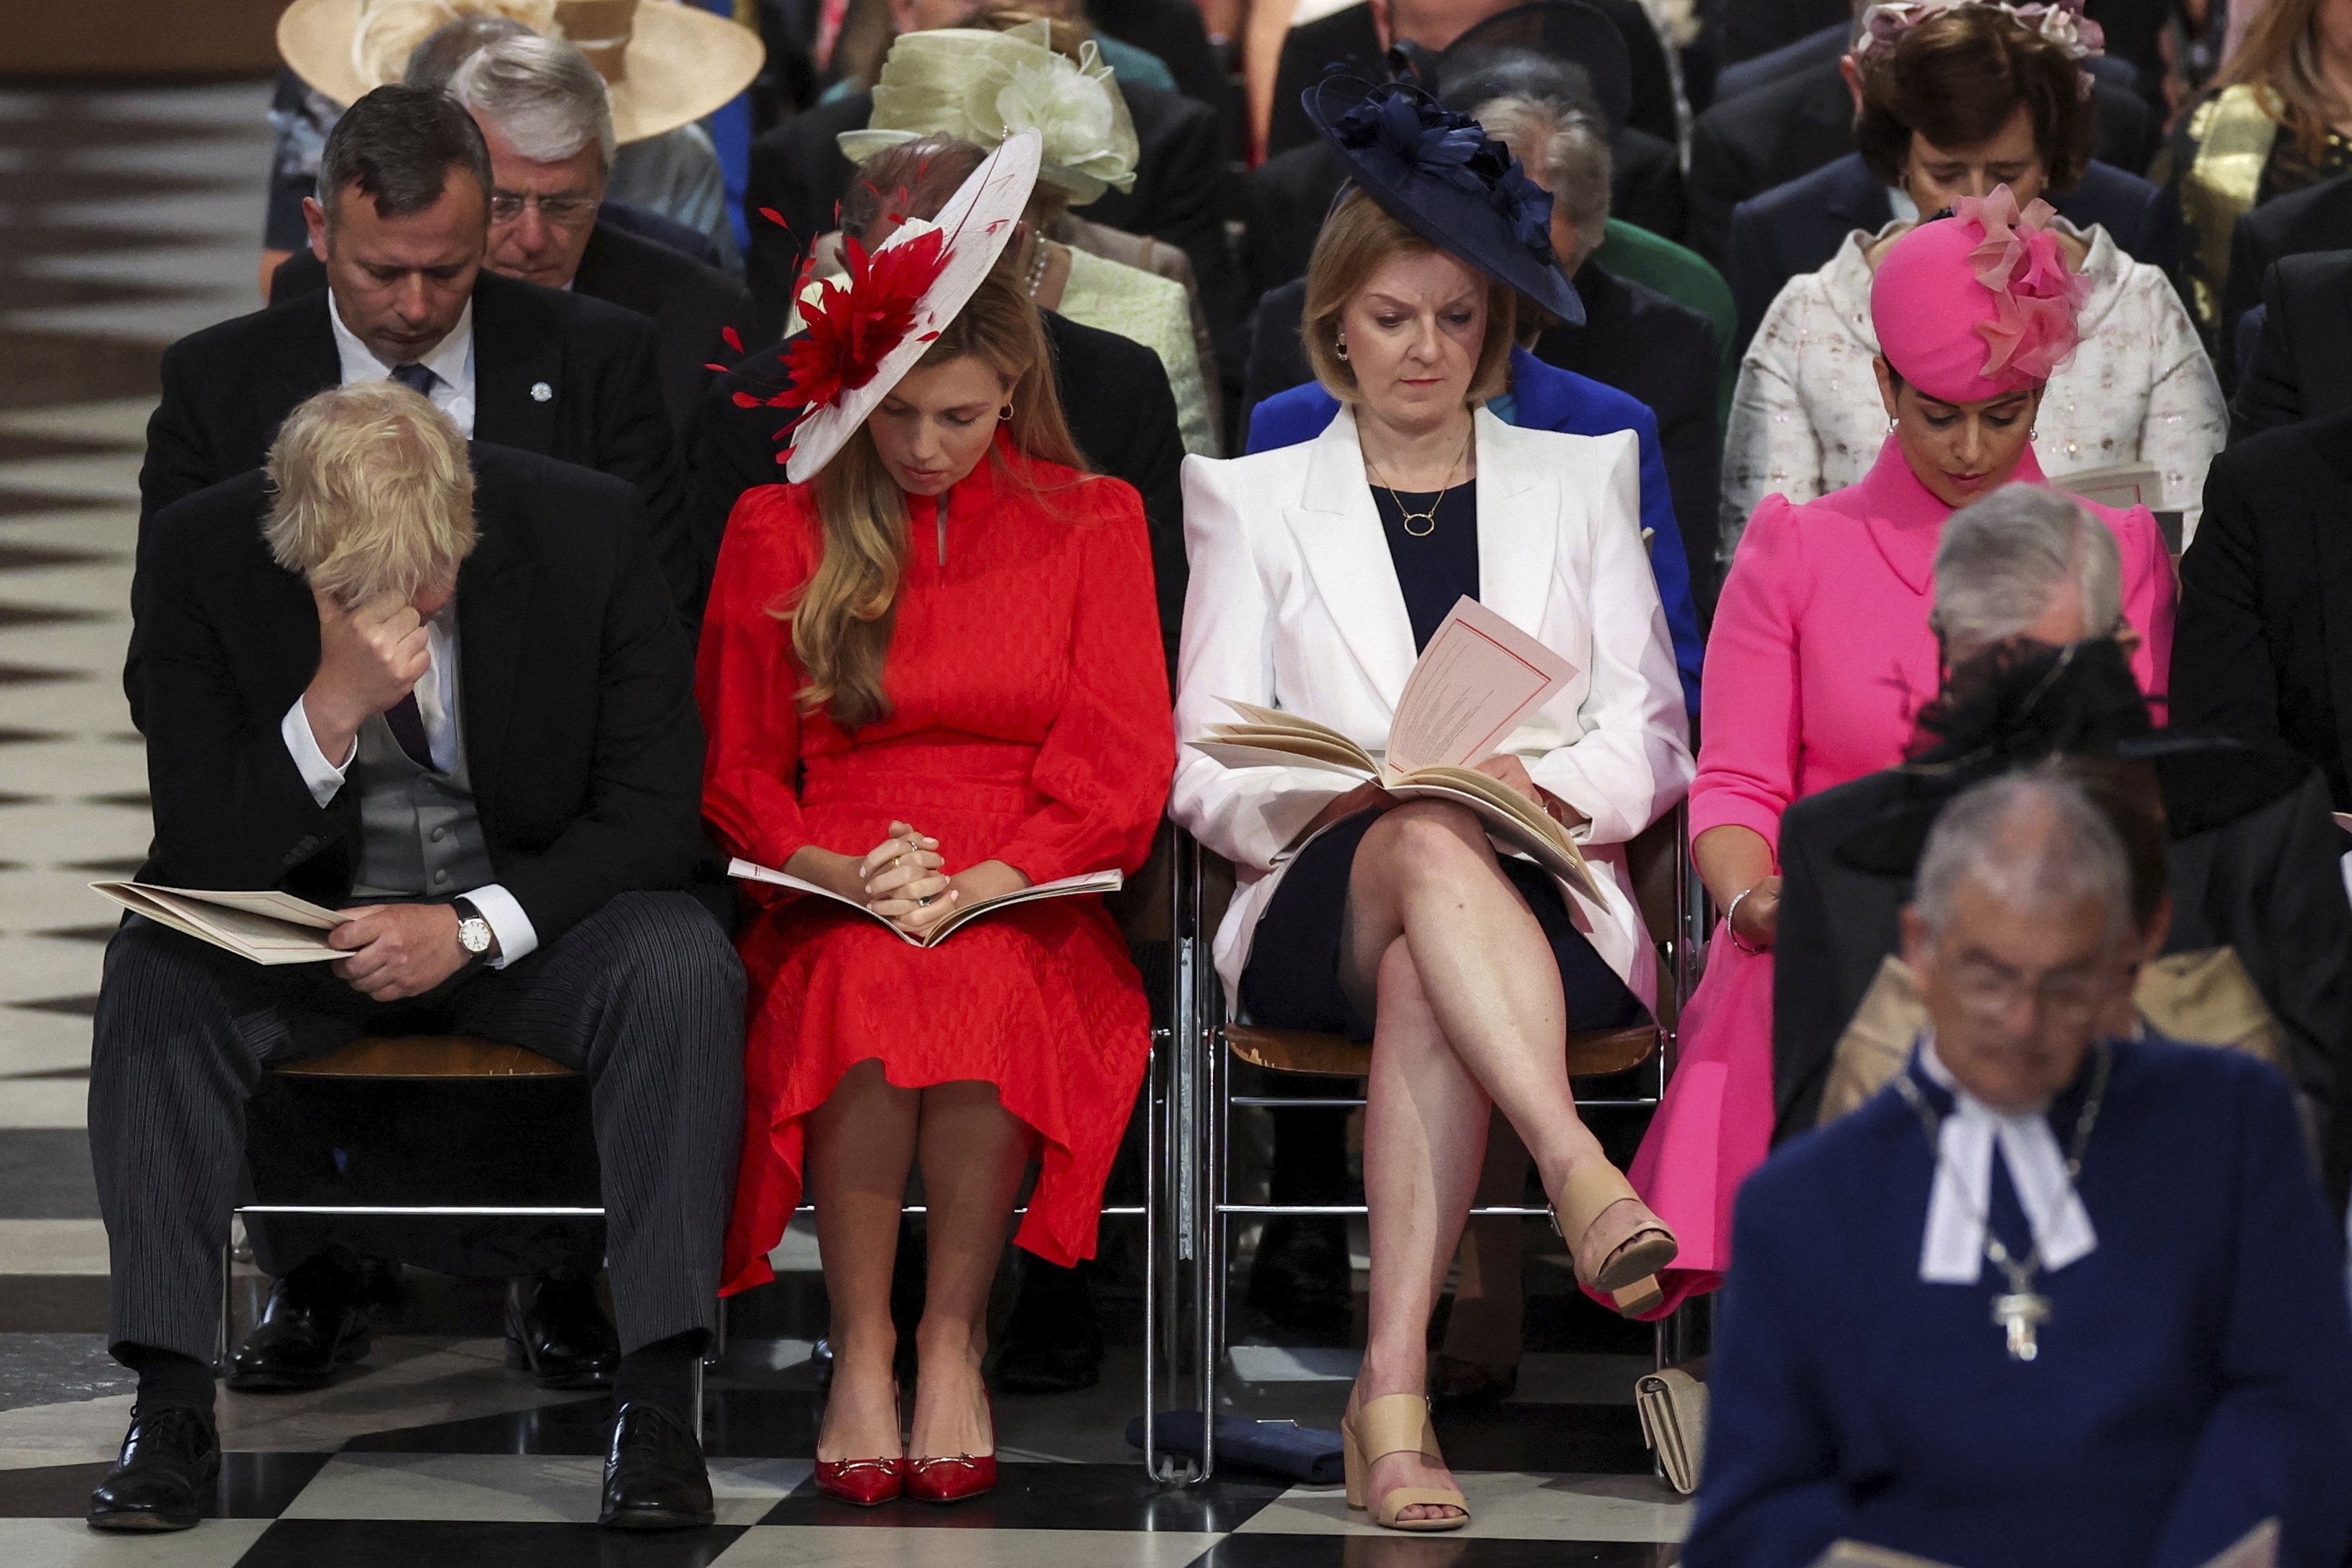 British Prime Minister Boris Johnson sits next to his wife, Carrie Johnson, at the National Service of Thanksgiving held at St Paul’s Cathedral in London as part of celebrations marking the Platinum Jubilee of Britain’s Queen Elizabeth II on June 3. Photo: pool via AP)